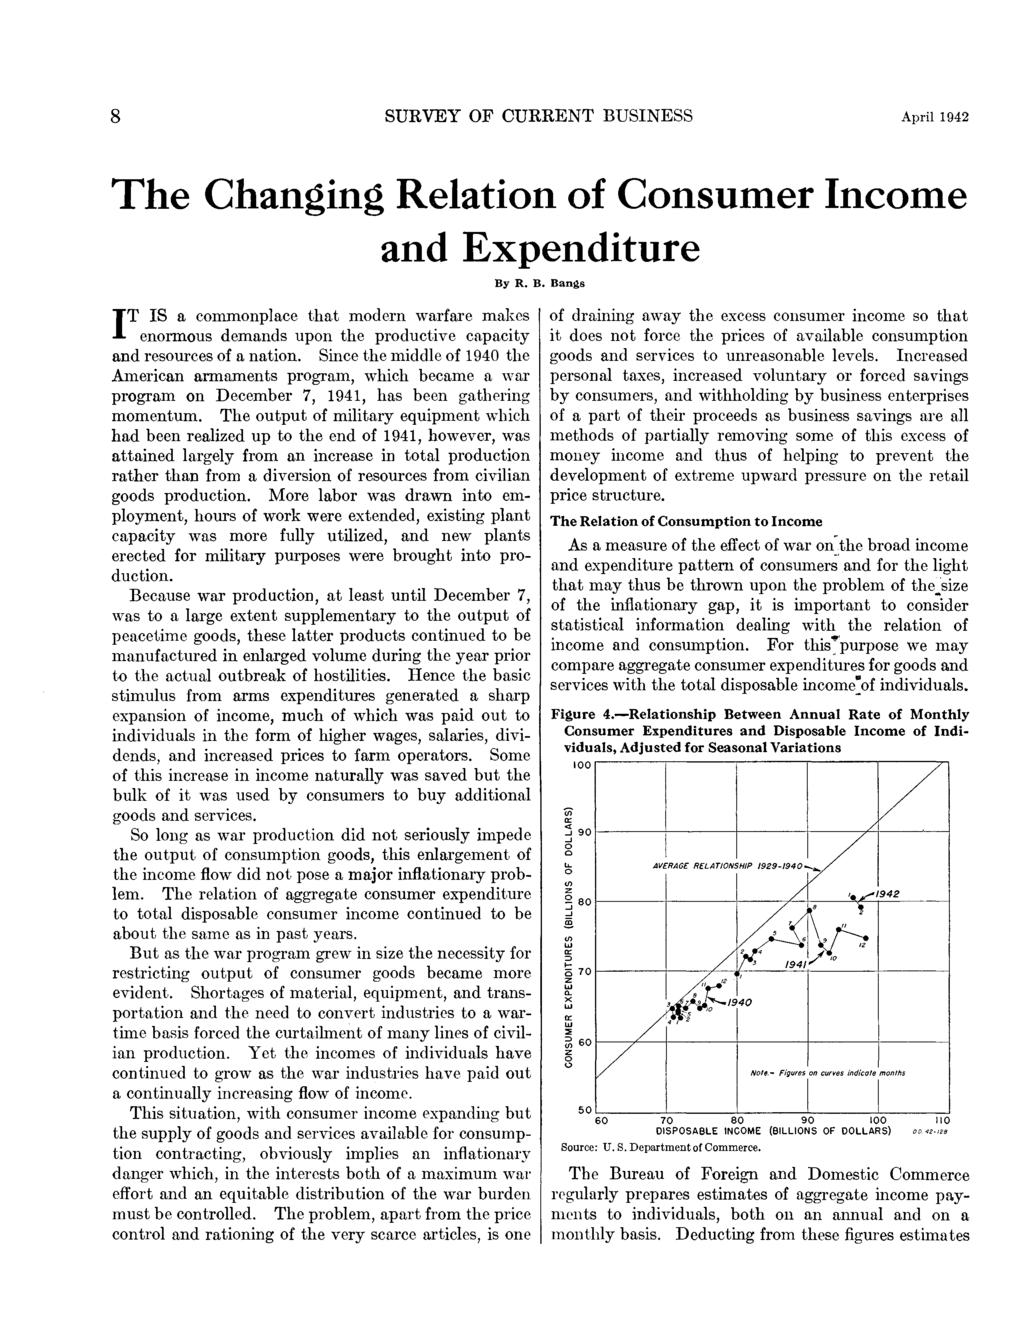 http:fraser.stlouisfed.org 8 SURVEY OF CURRENT BUSINESS The Changing Relation of Consumer Income and Expenditure By R. B. Bangs IT IS a commonplace that modern warfare makes enormous demands upon the productive capacity and resources of a nation.